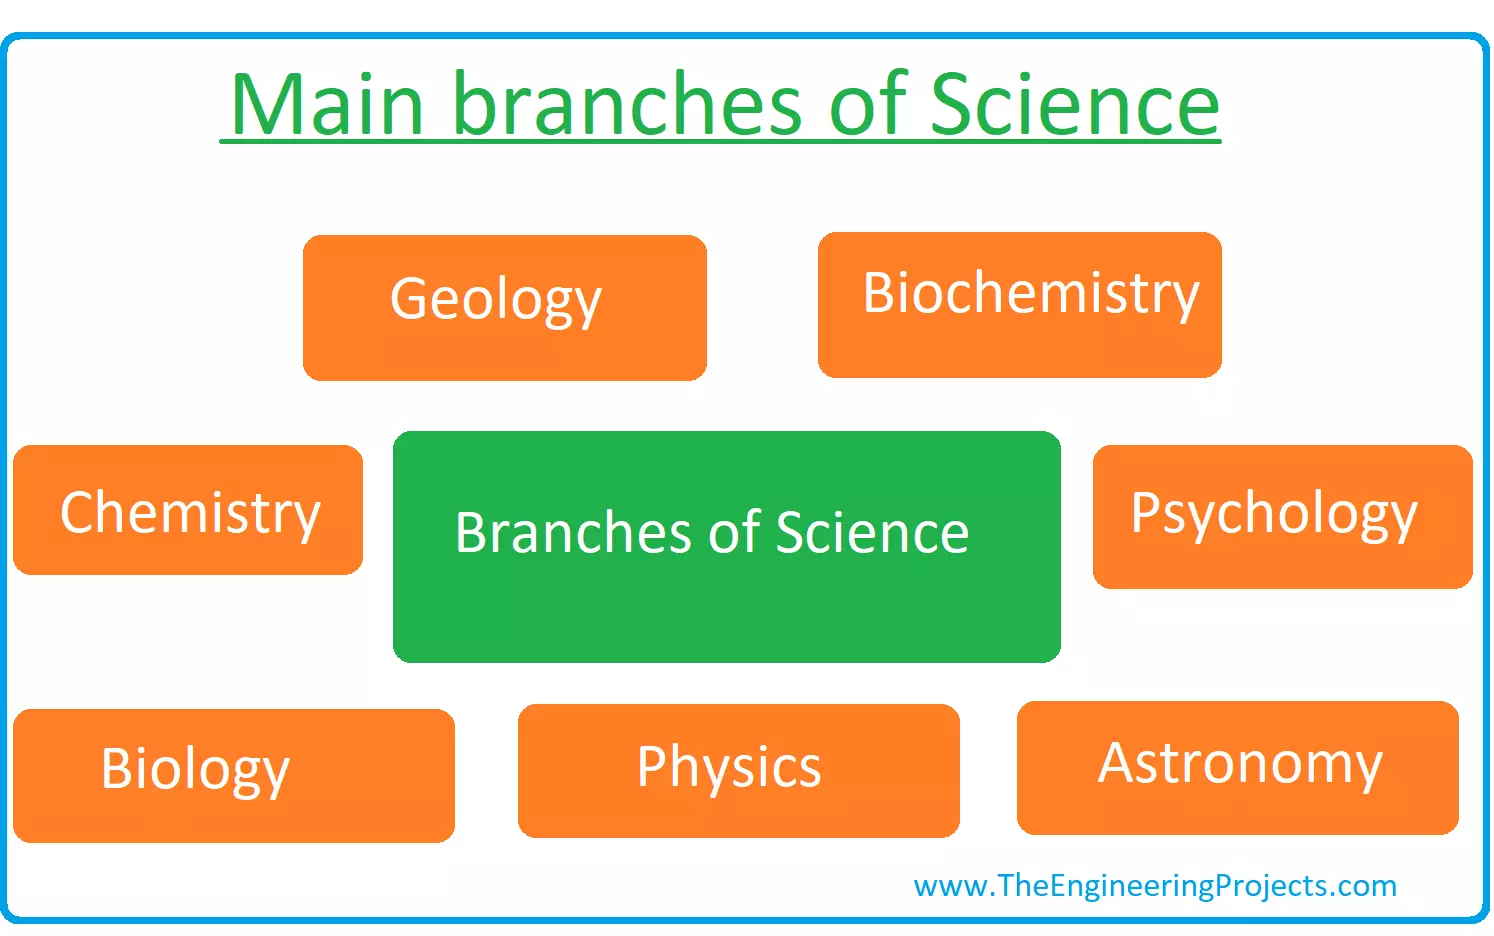 the three branches of science are